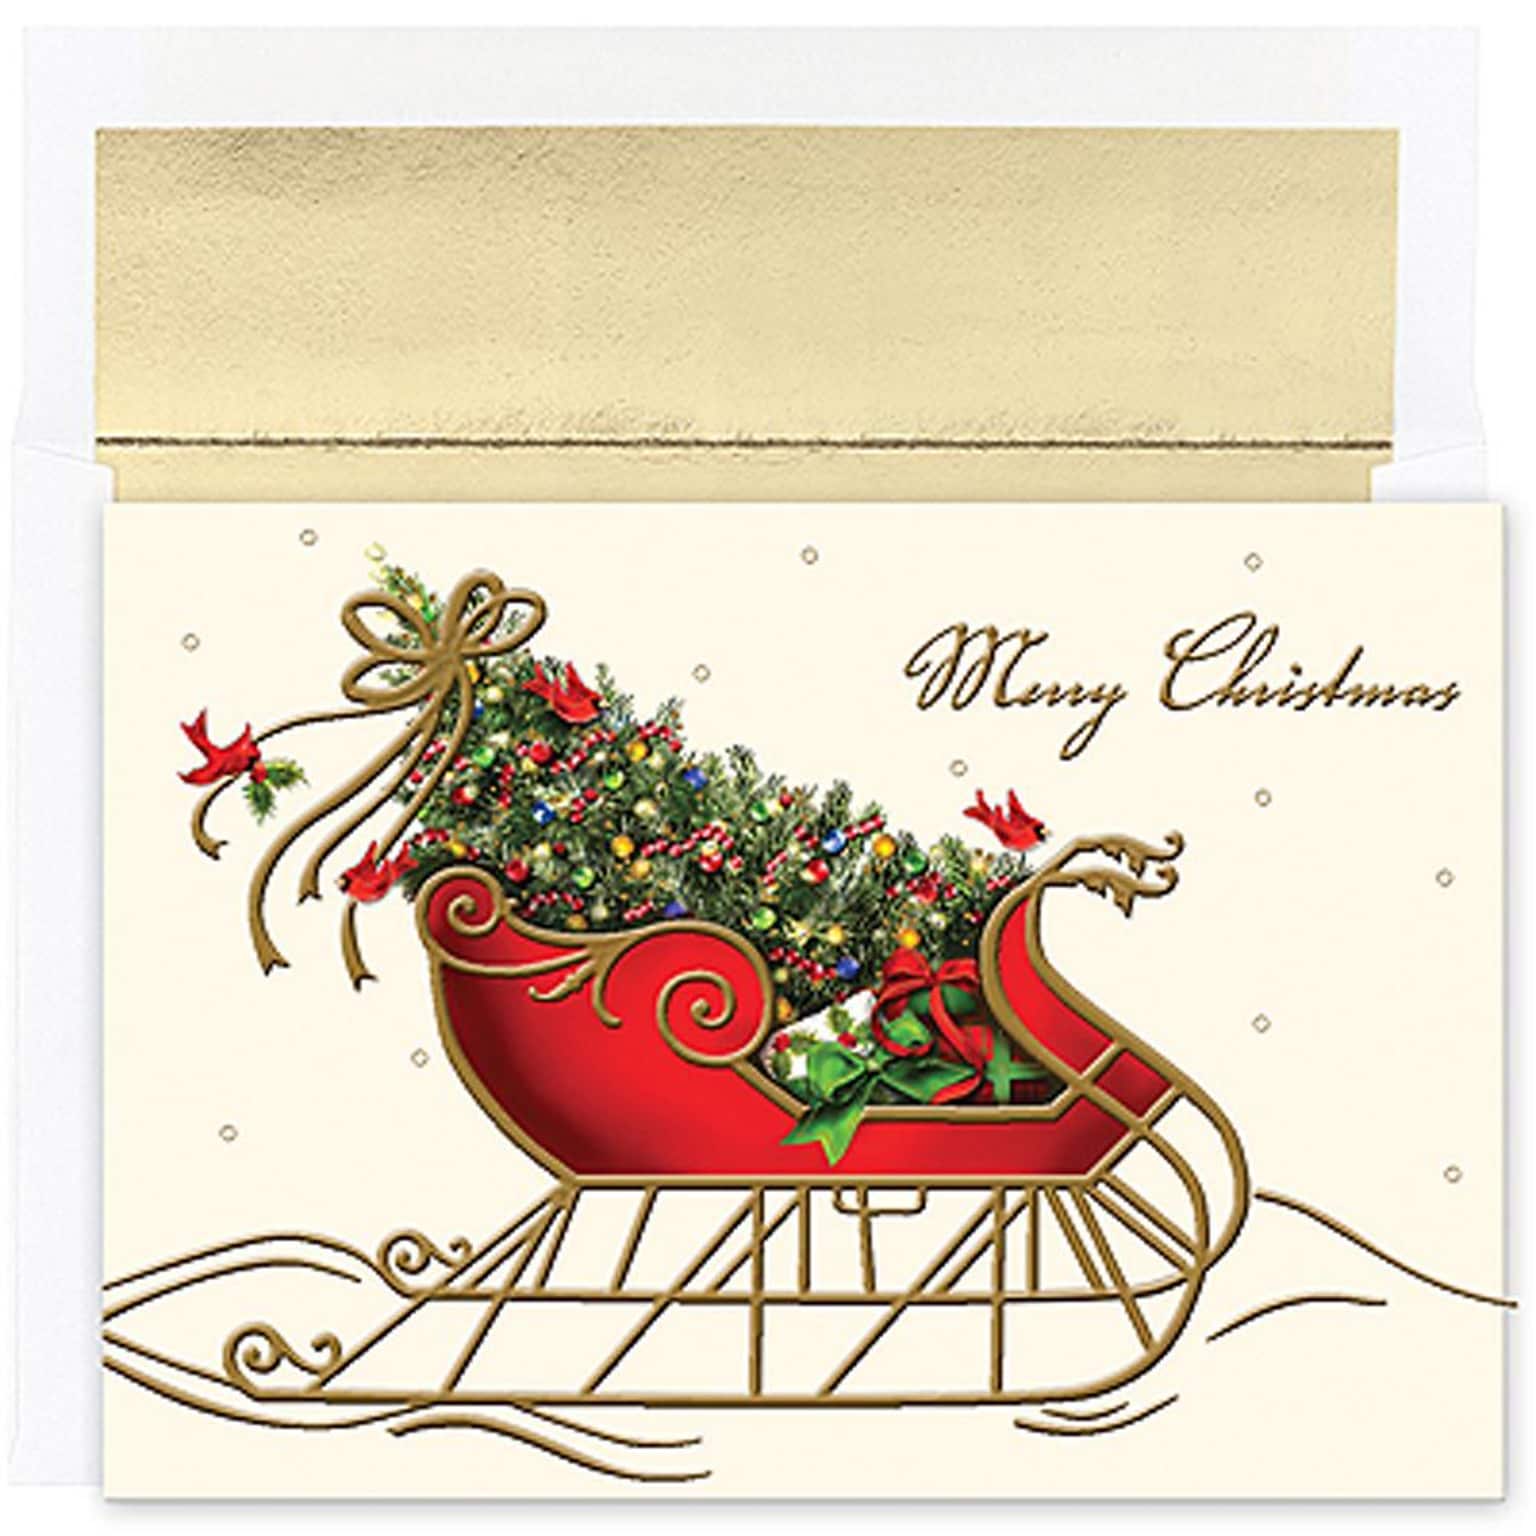 JAM Paper® Christmas Holiday Cards Set, Peace and Joy Holiday Sleigh, 16/pack (526843800)